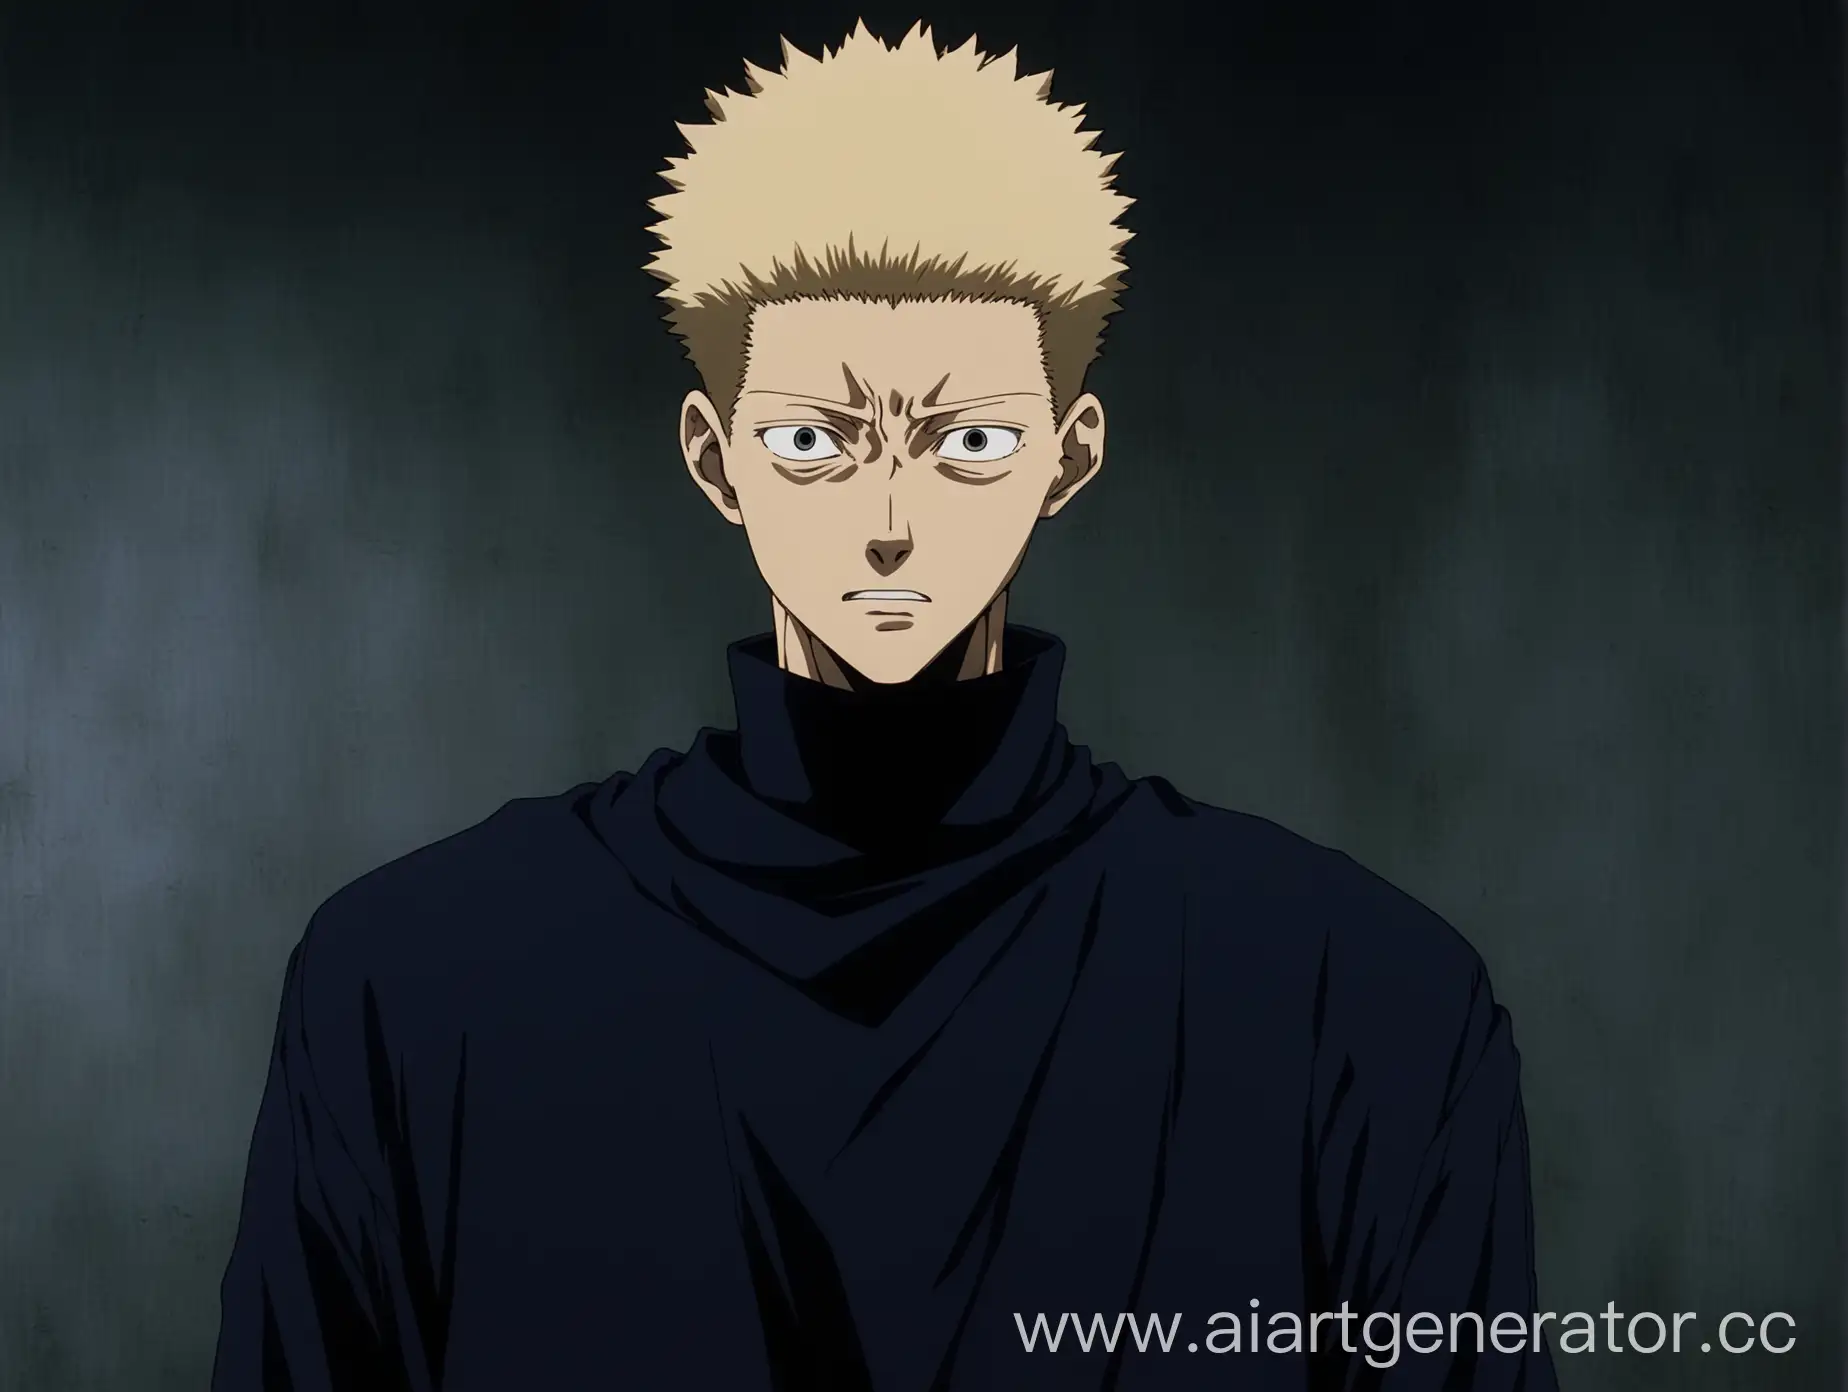 Mysterious-Anime-Character-in-Silent-Contemplation-1990s-Style-Inspired-by-Jujutsu-Kaisen